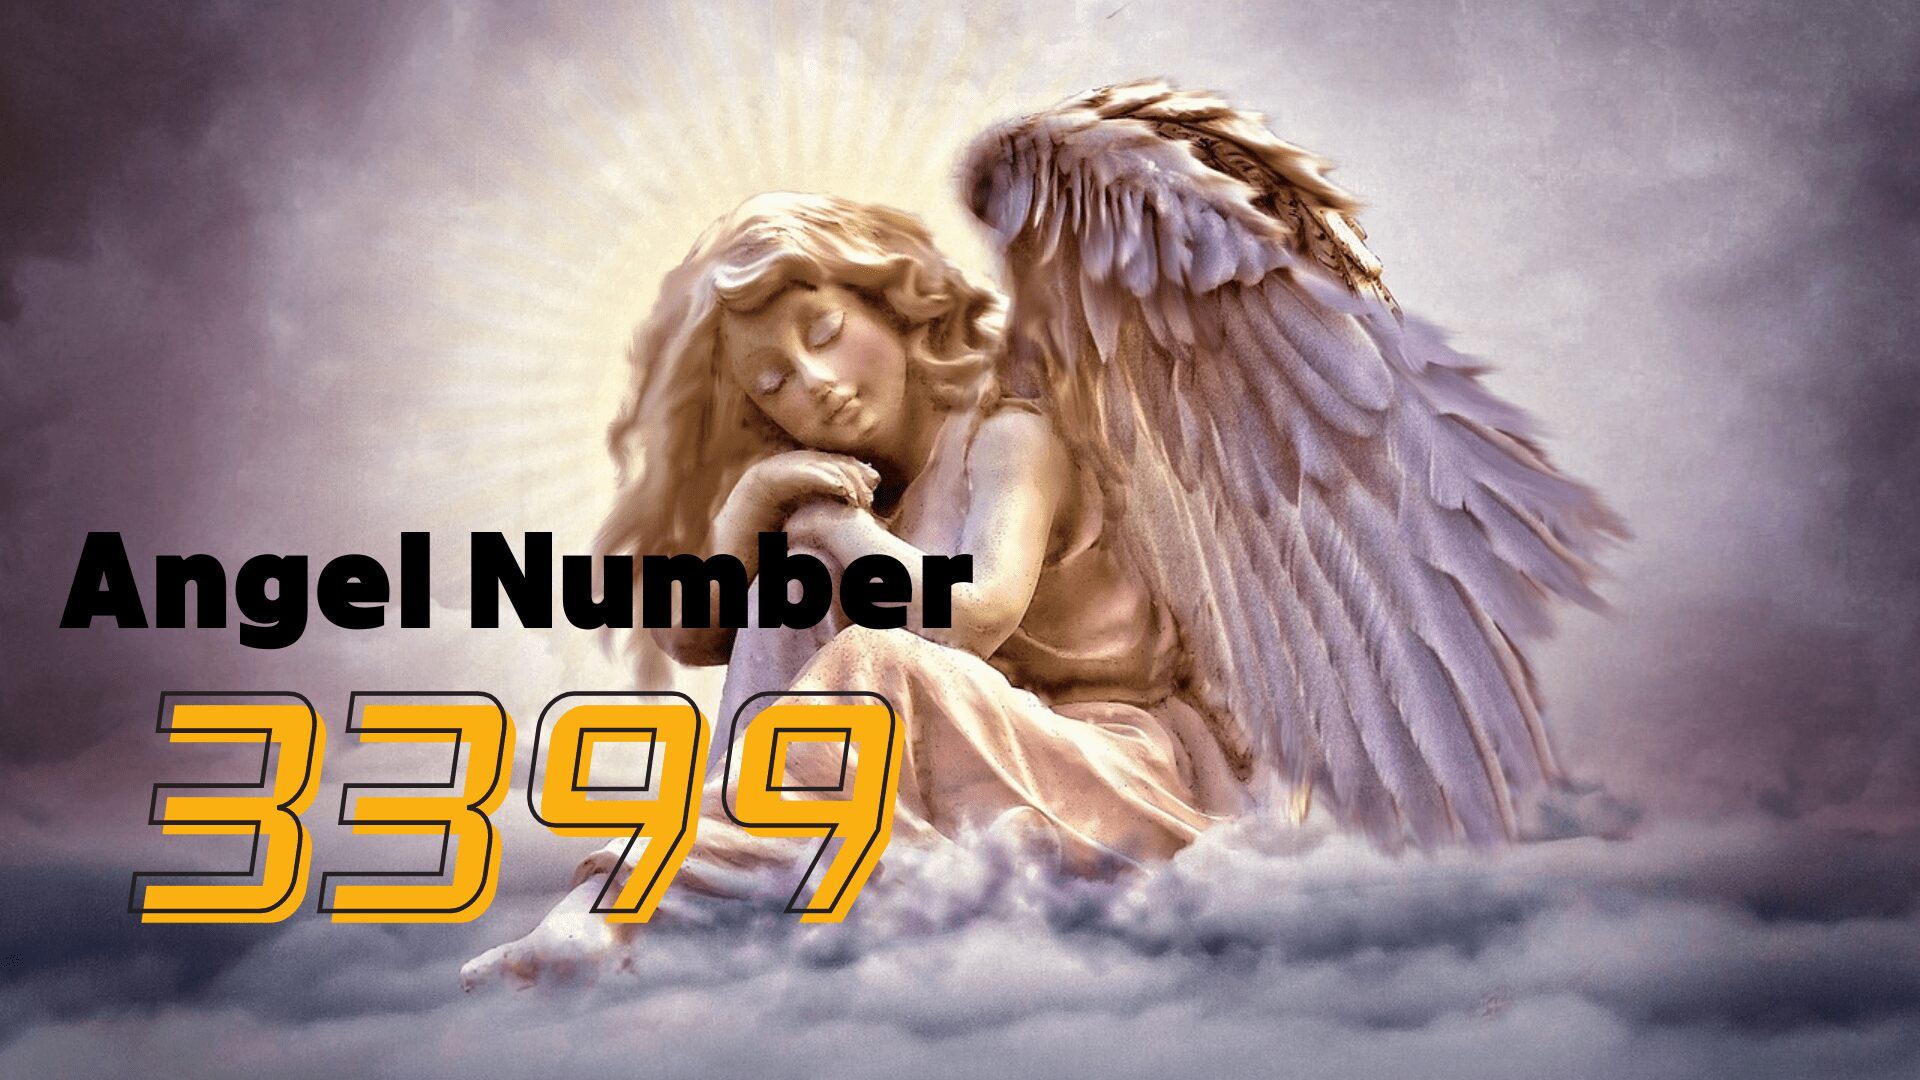 Angel Number 3399 For Love